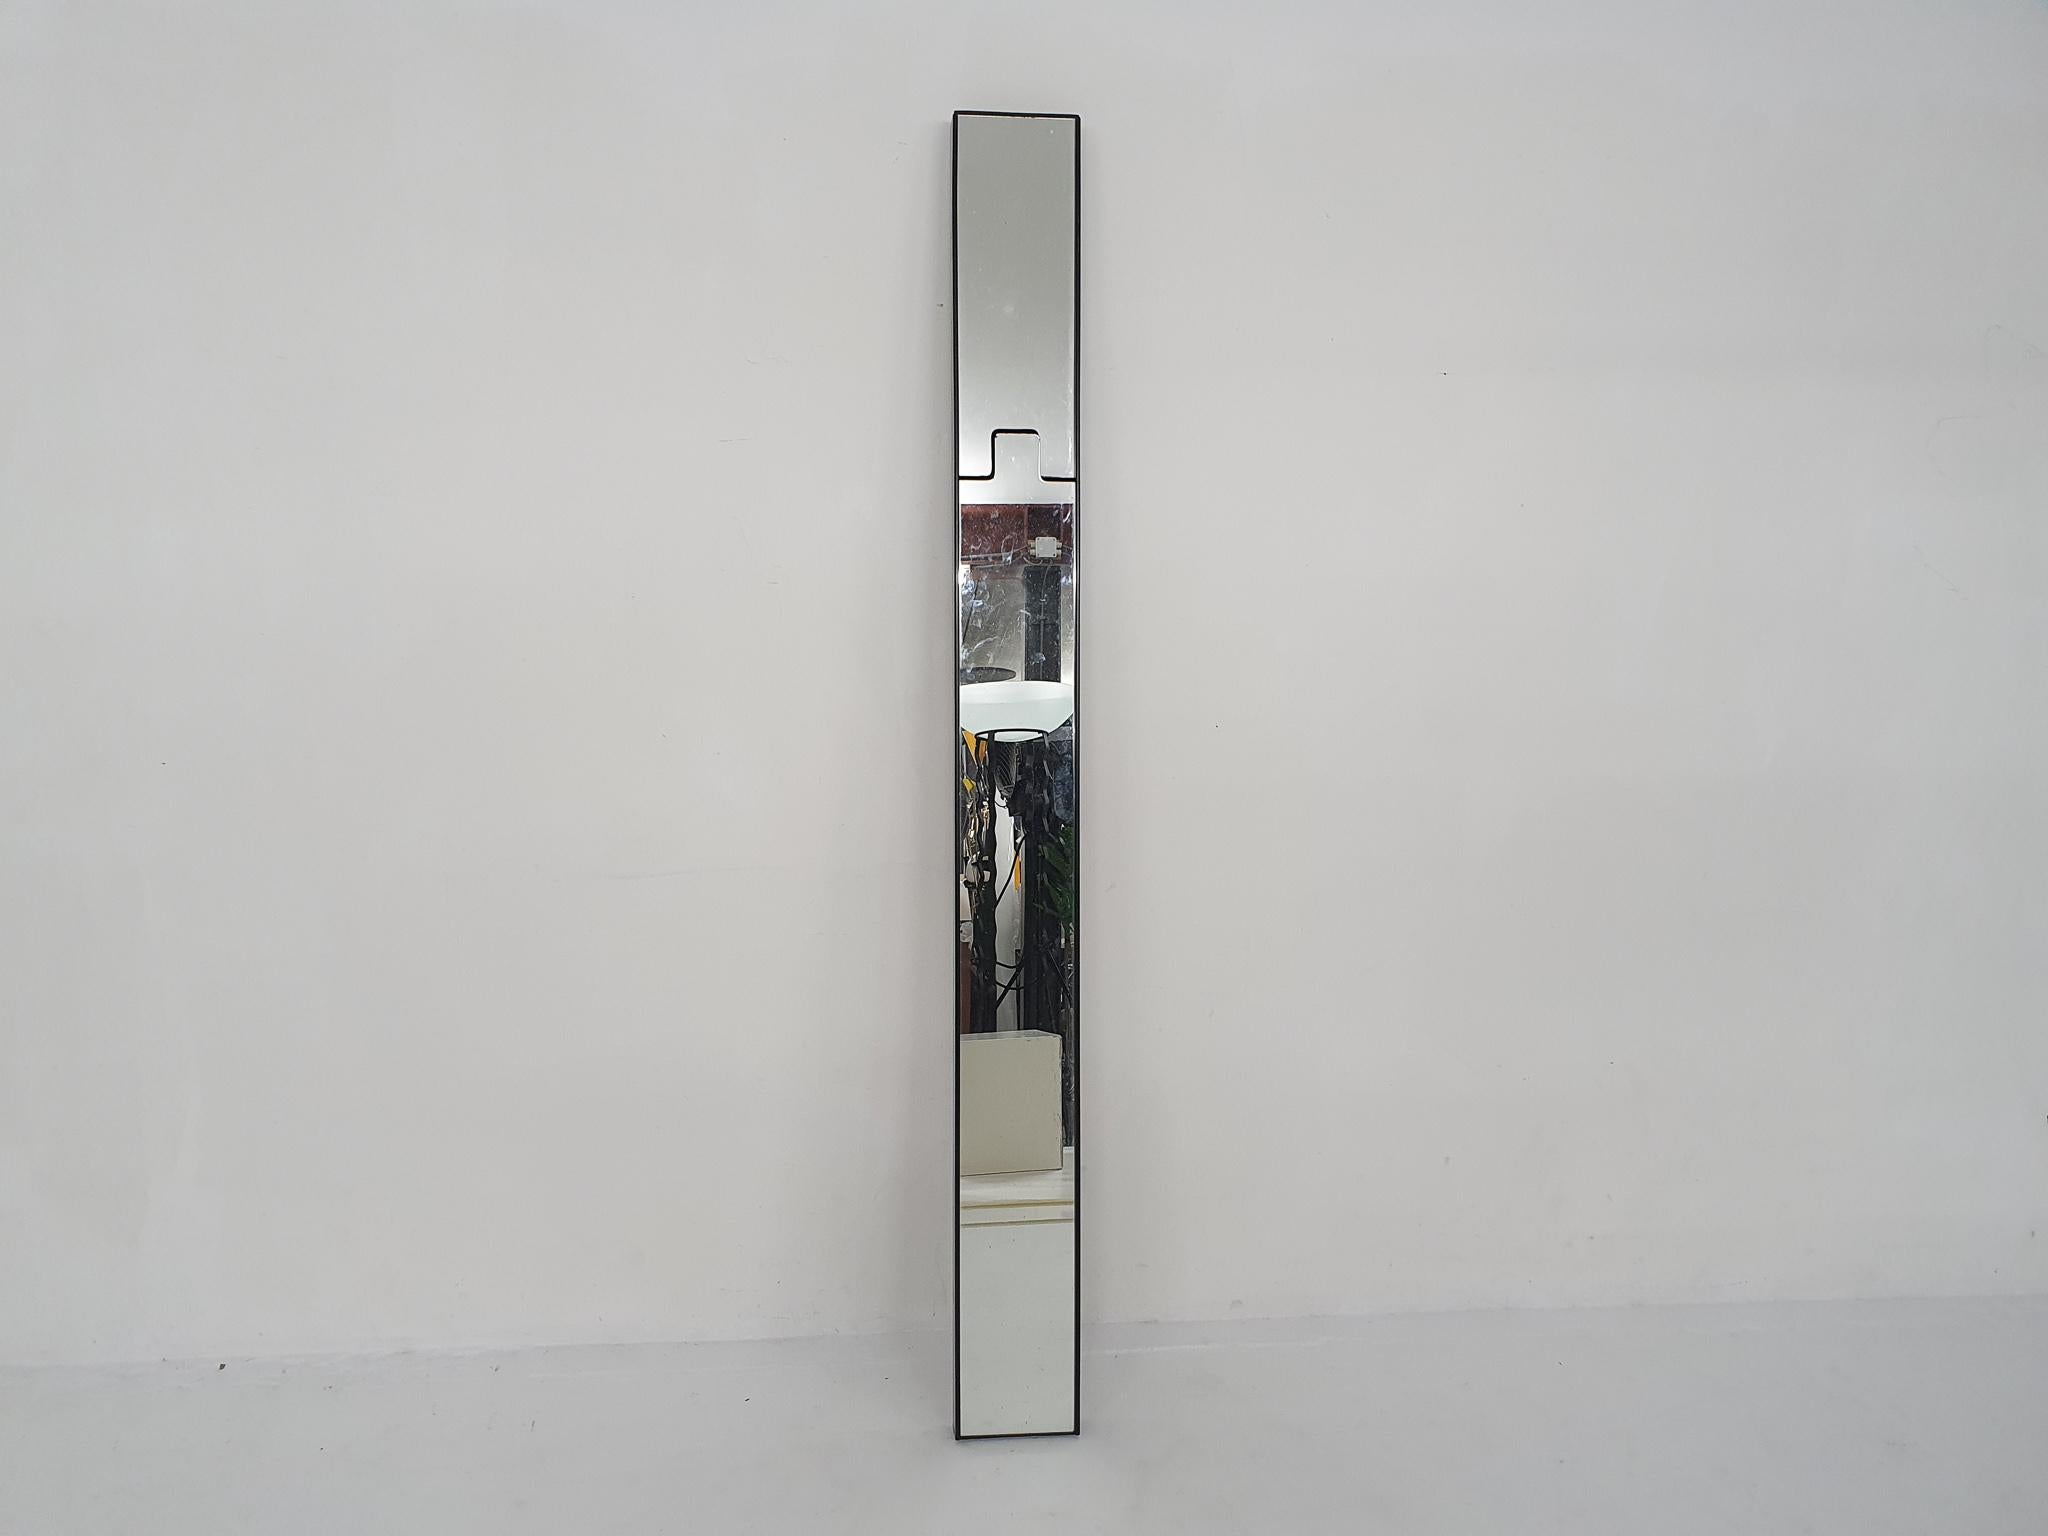 Black plastic mirror by Luciano Bertoncini. The upper part can be pushed back a little to create a coat hanger.
There is a small chip from the mirror. The plastic part is in good condition.